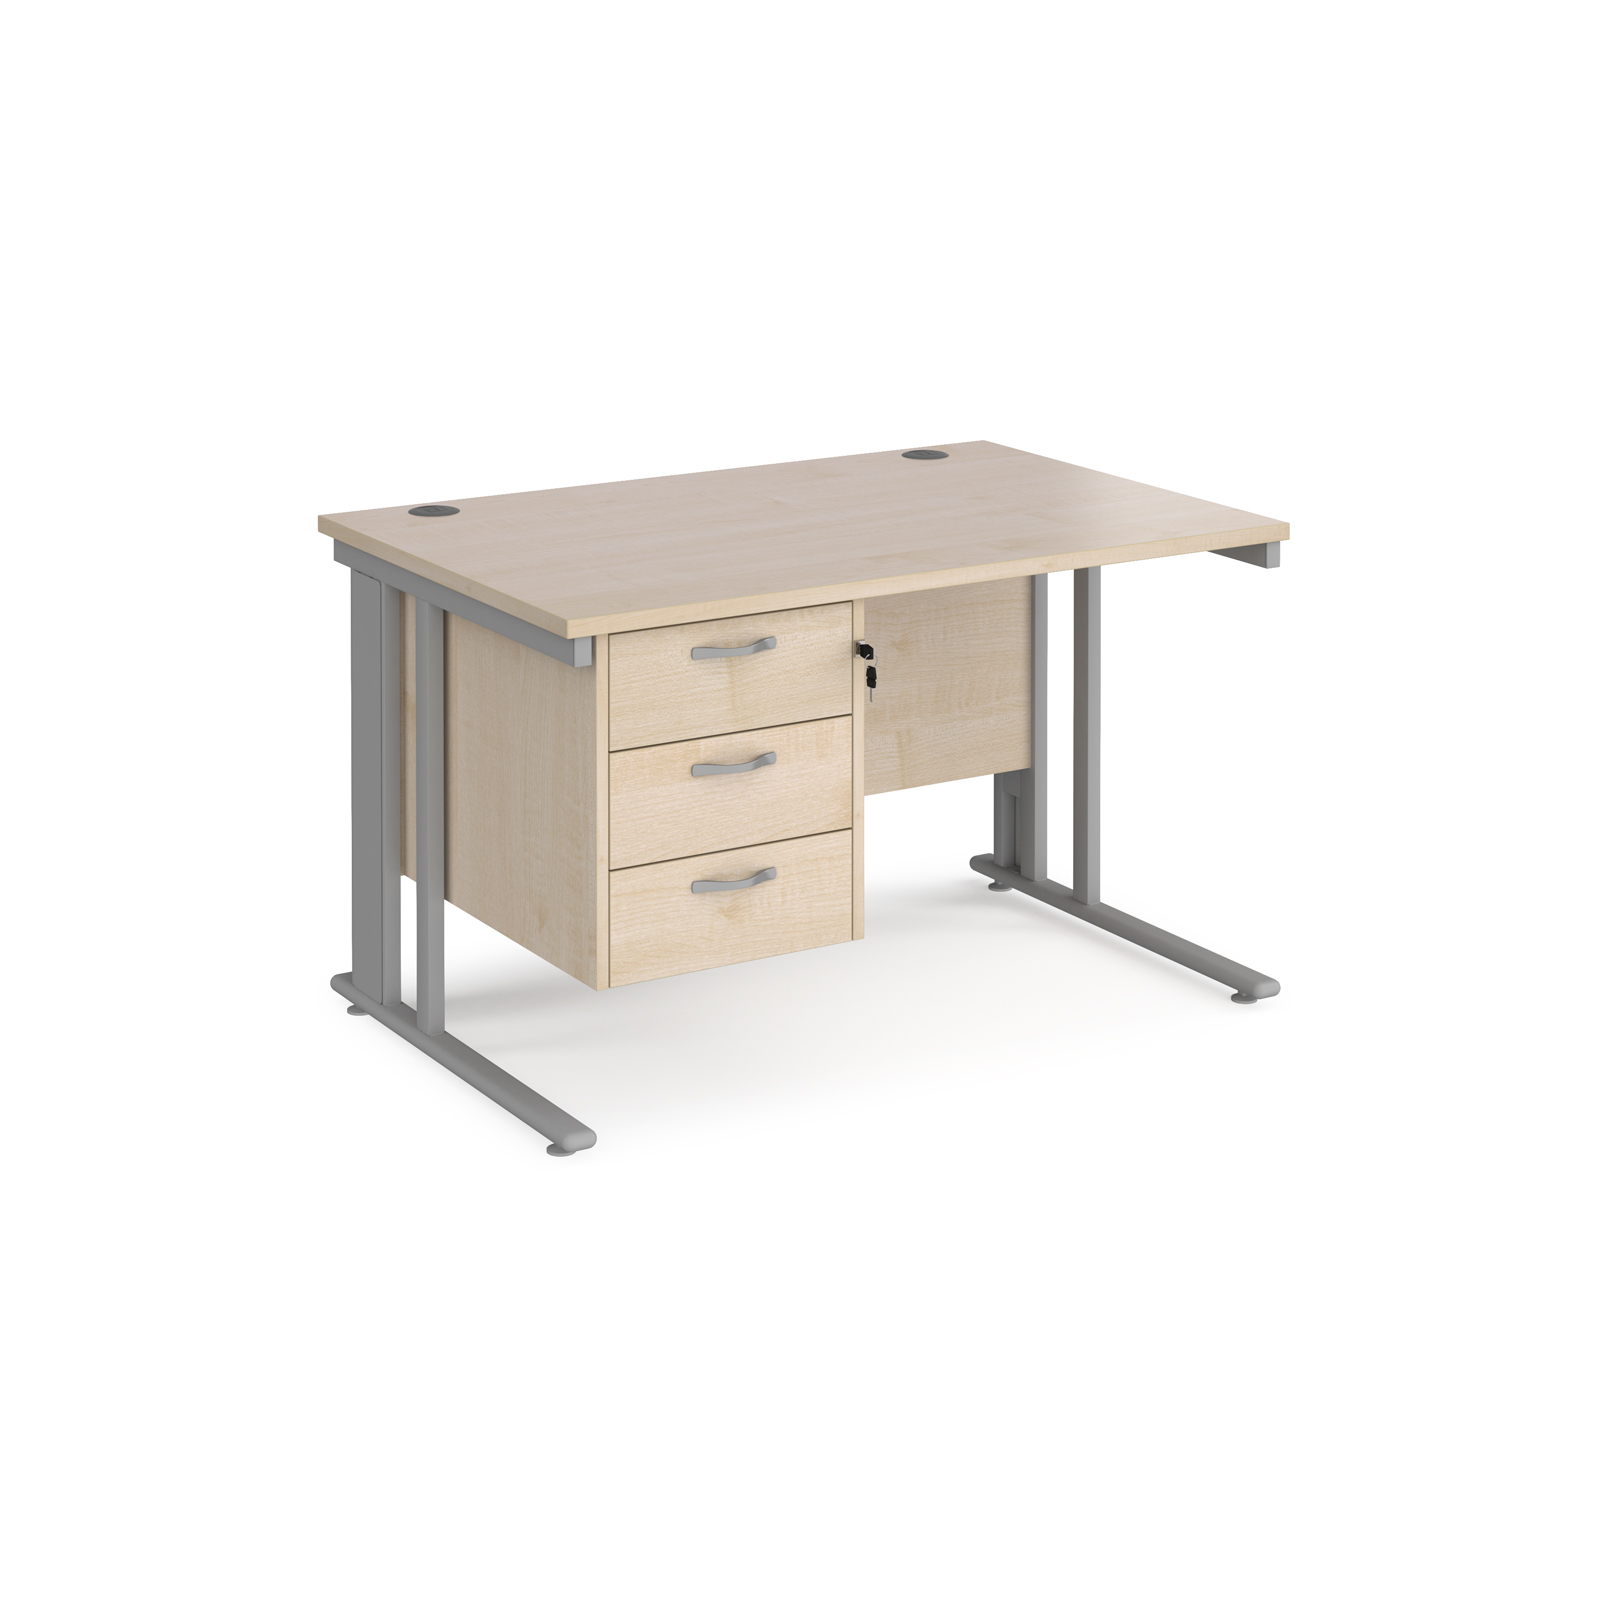 Maestro 25 straight desk 1200mm x 800mm with 3 drawer pedestal - silver cable managed leg frame, maple top